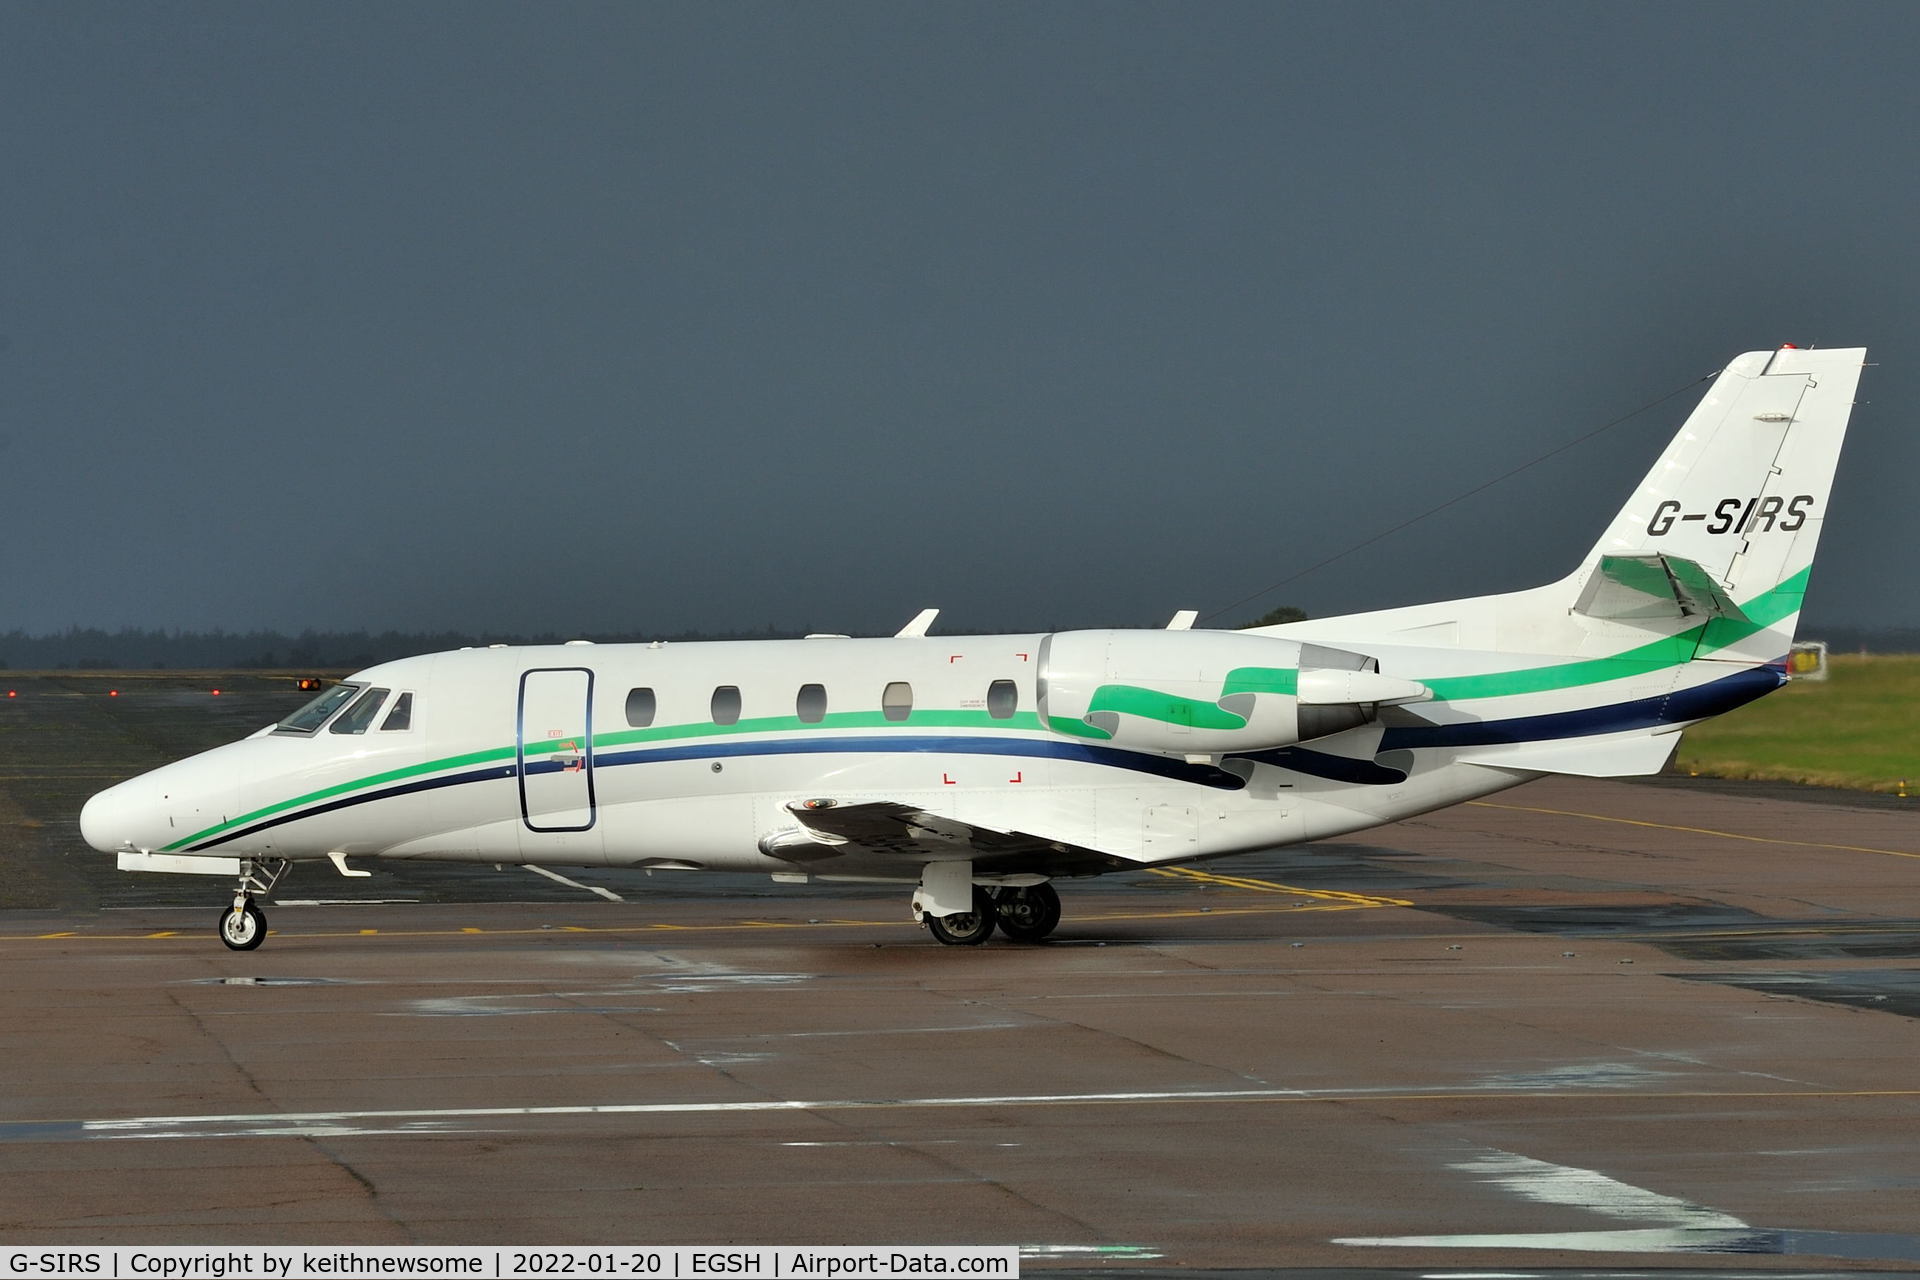 G-SIRS, 2001 Cessna 560XL Citation Excel C/N 560-5185, Arriving at Norwich from Edinburgh.